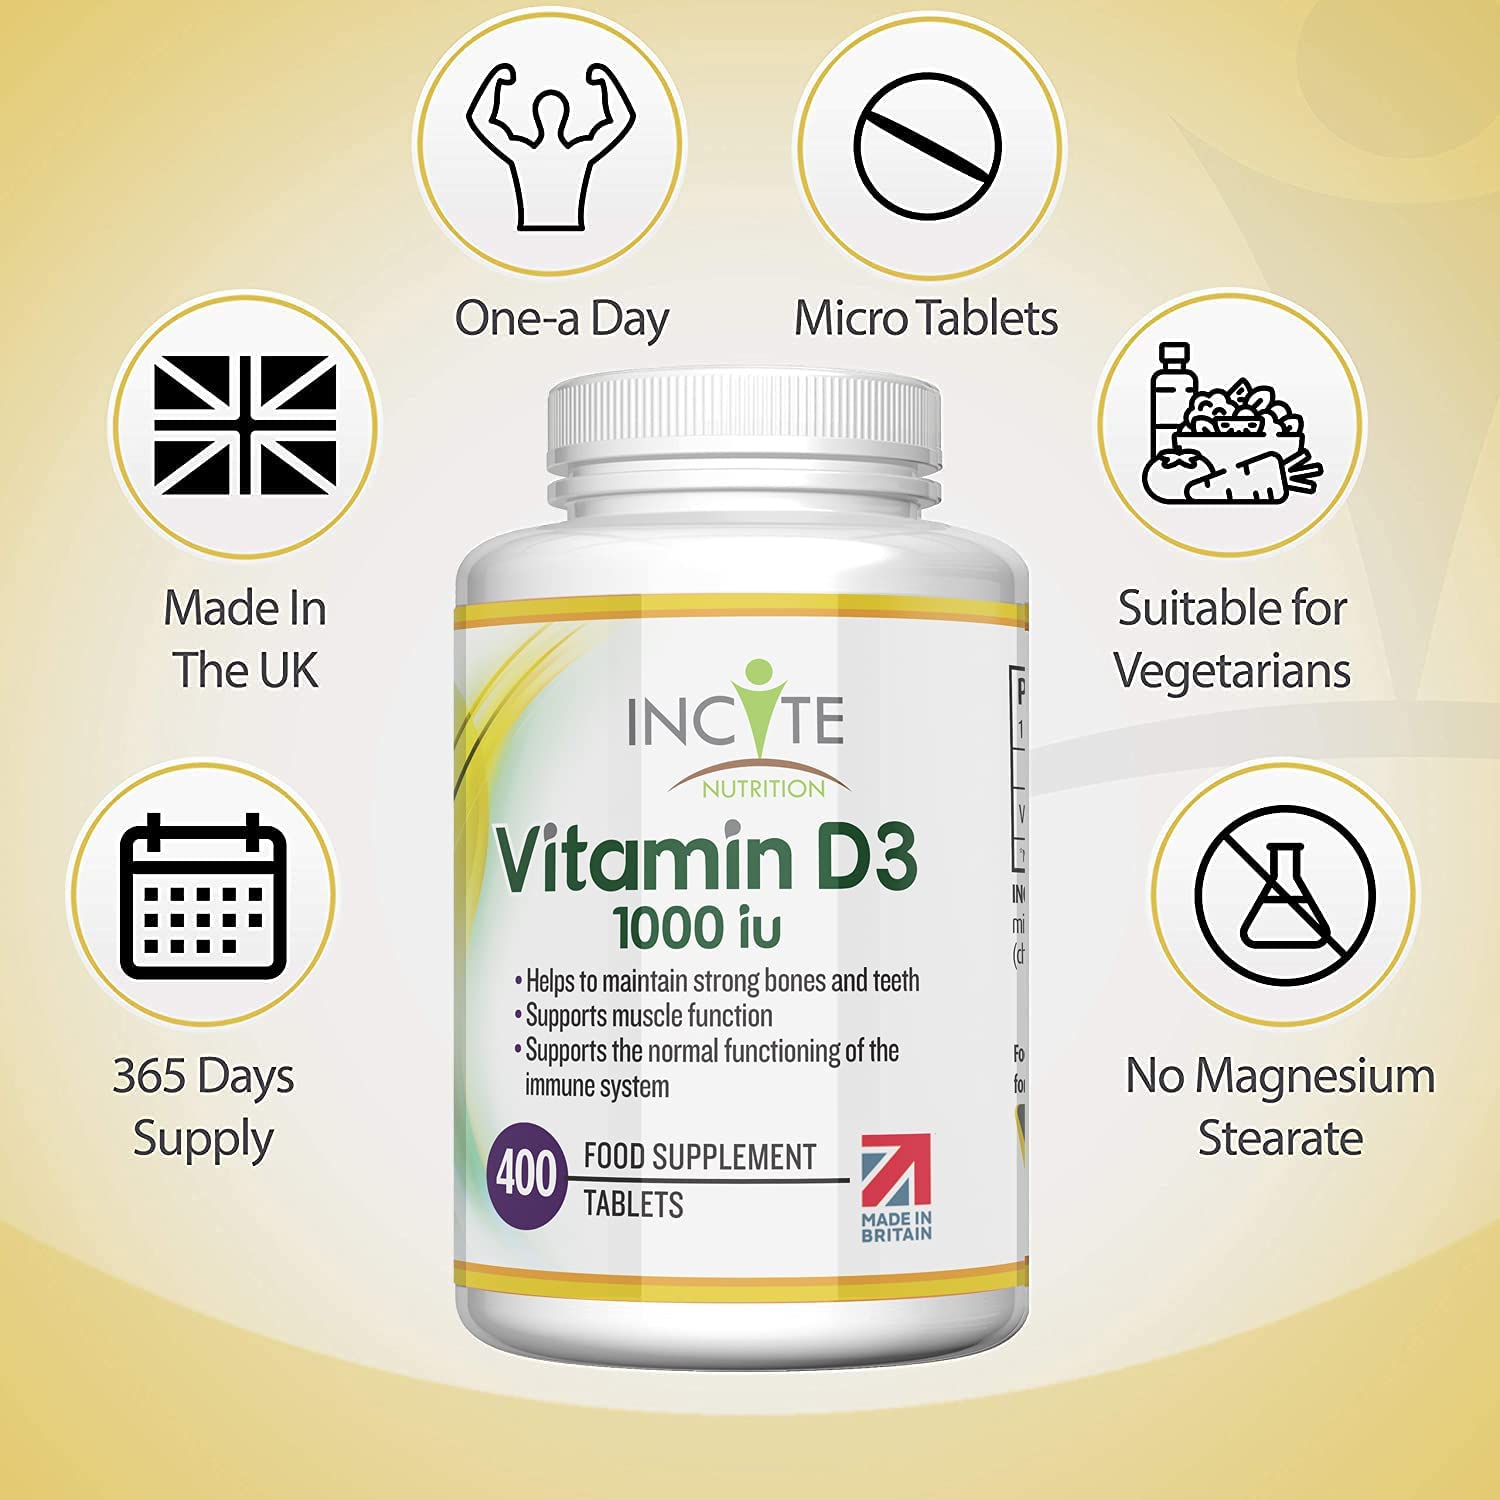 Vitamin D 1000iu - 400 Premium Vitamin D3 Easy-Swallow Micro Tablets - One a Day High Strength Cholecalciferol VIT D3 - Vegetarian Supplement - Made in The...